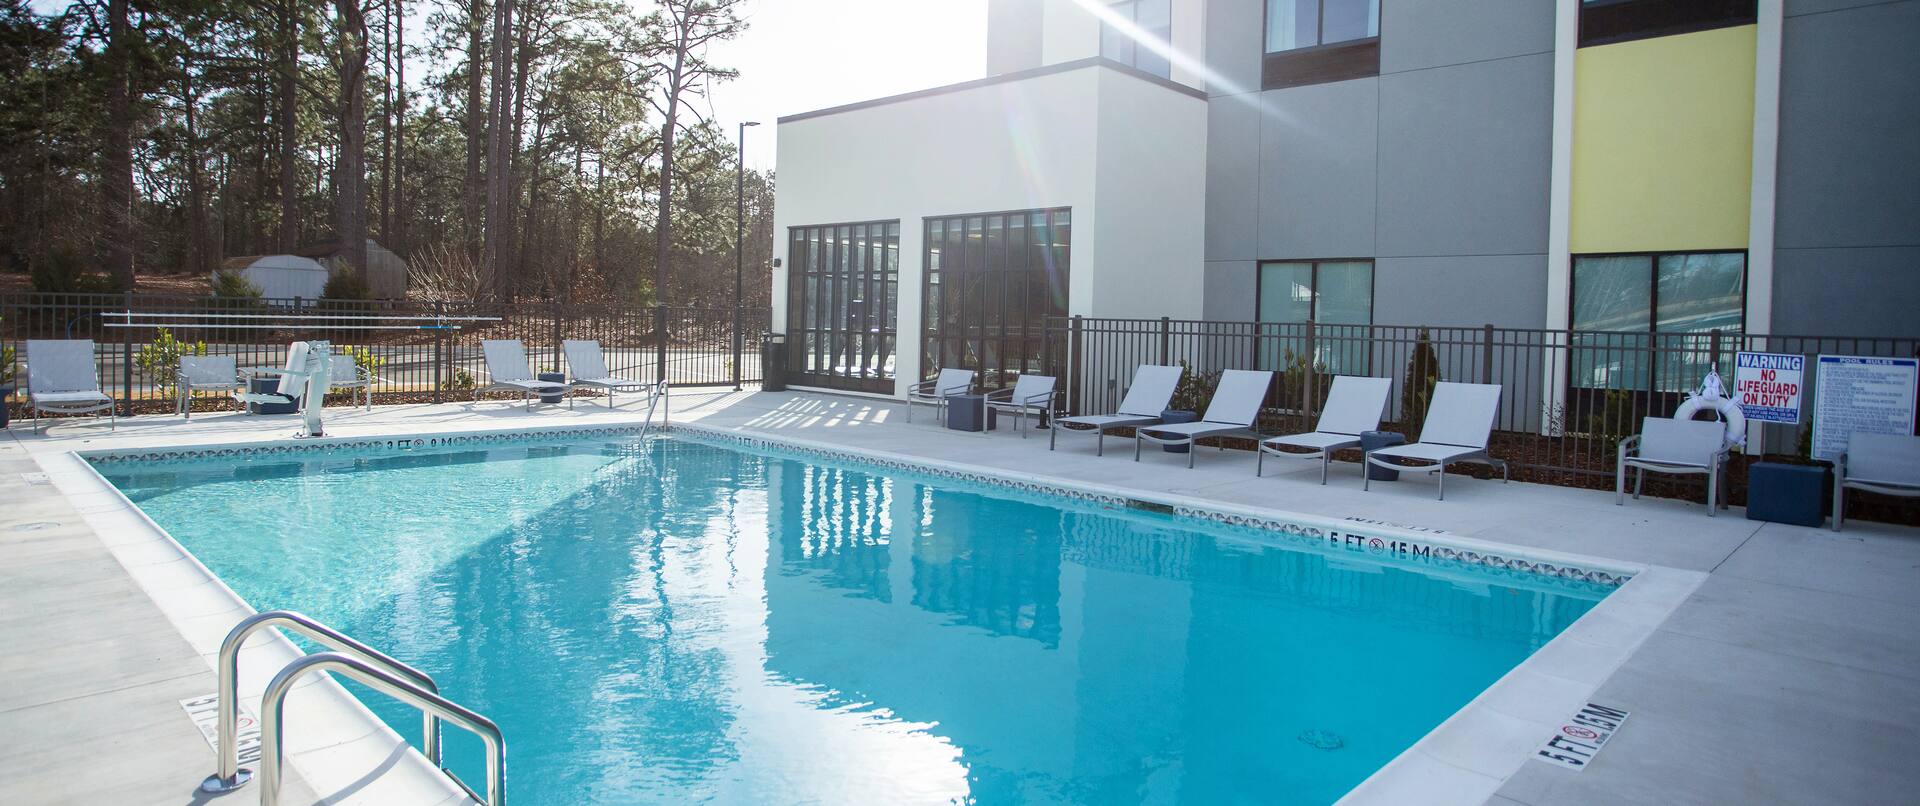 Outdoor Pool with Seating Area